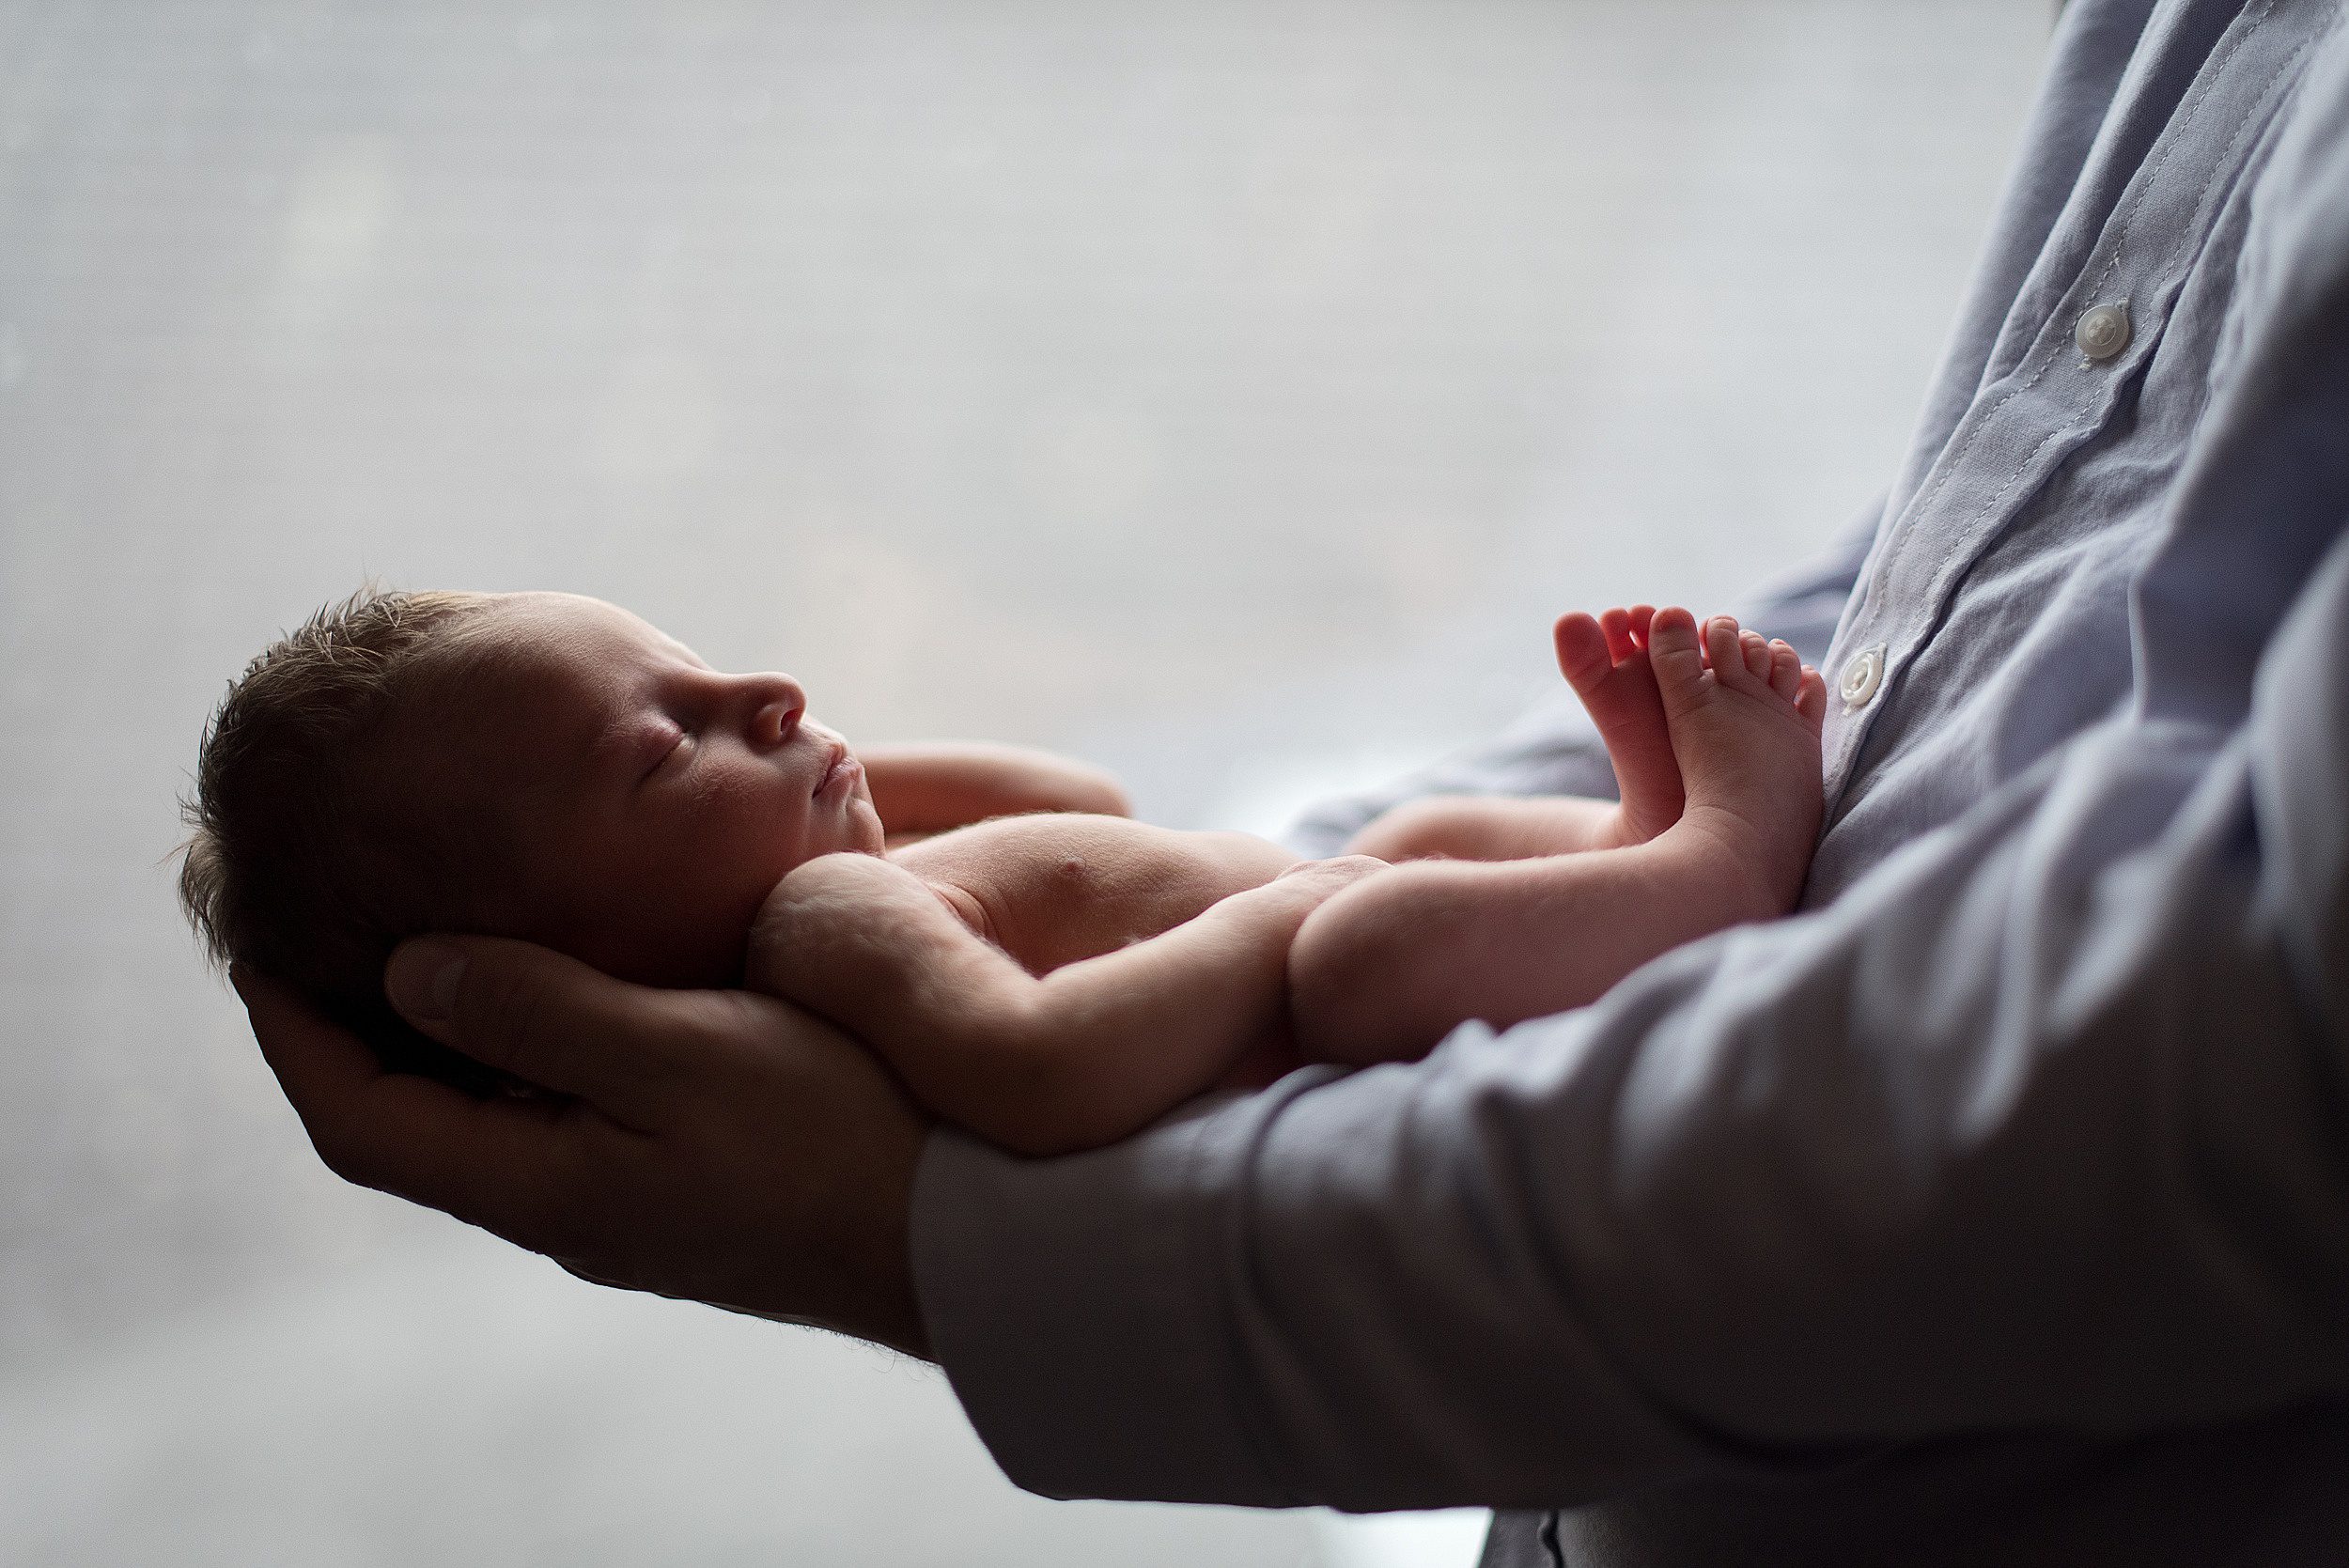 A newborn baby sleeps in dad's arms thanks to yale maternal fetal medicine